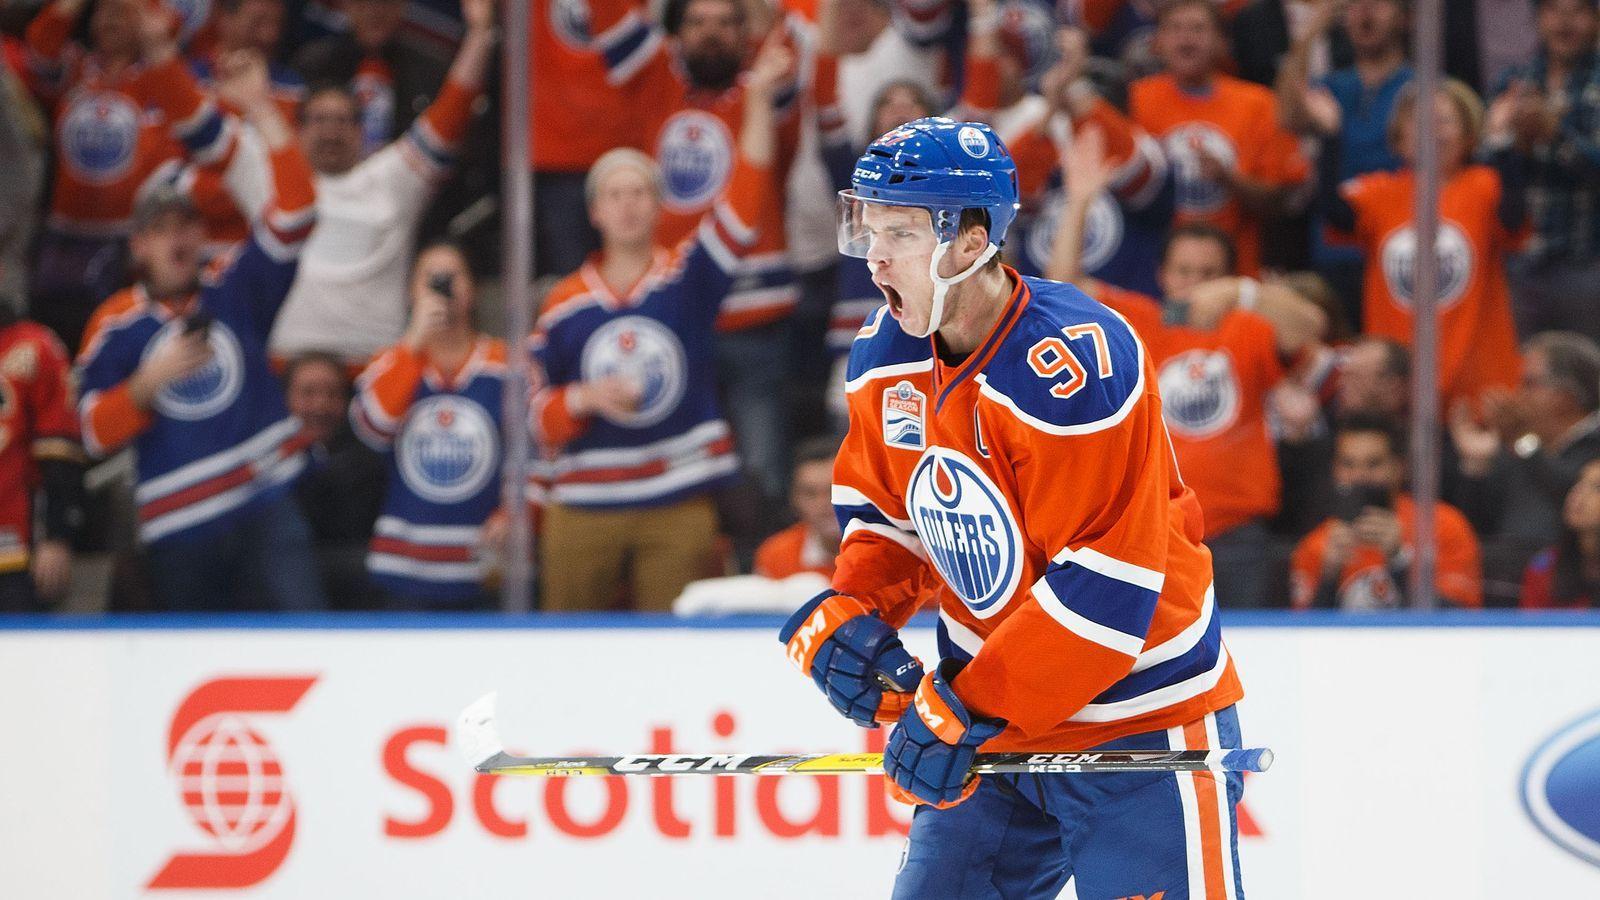 Oilers Sign Connor McDavid To Historic 8 Year, $100 Million